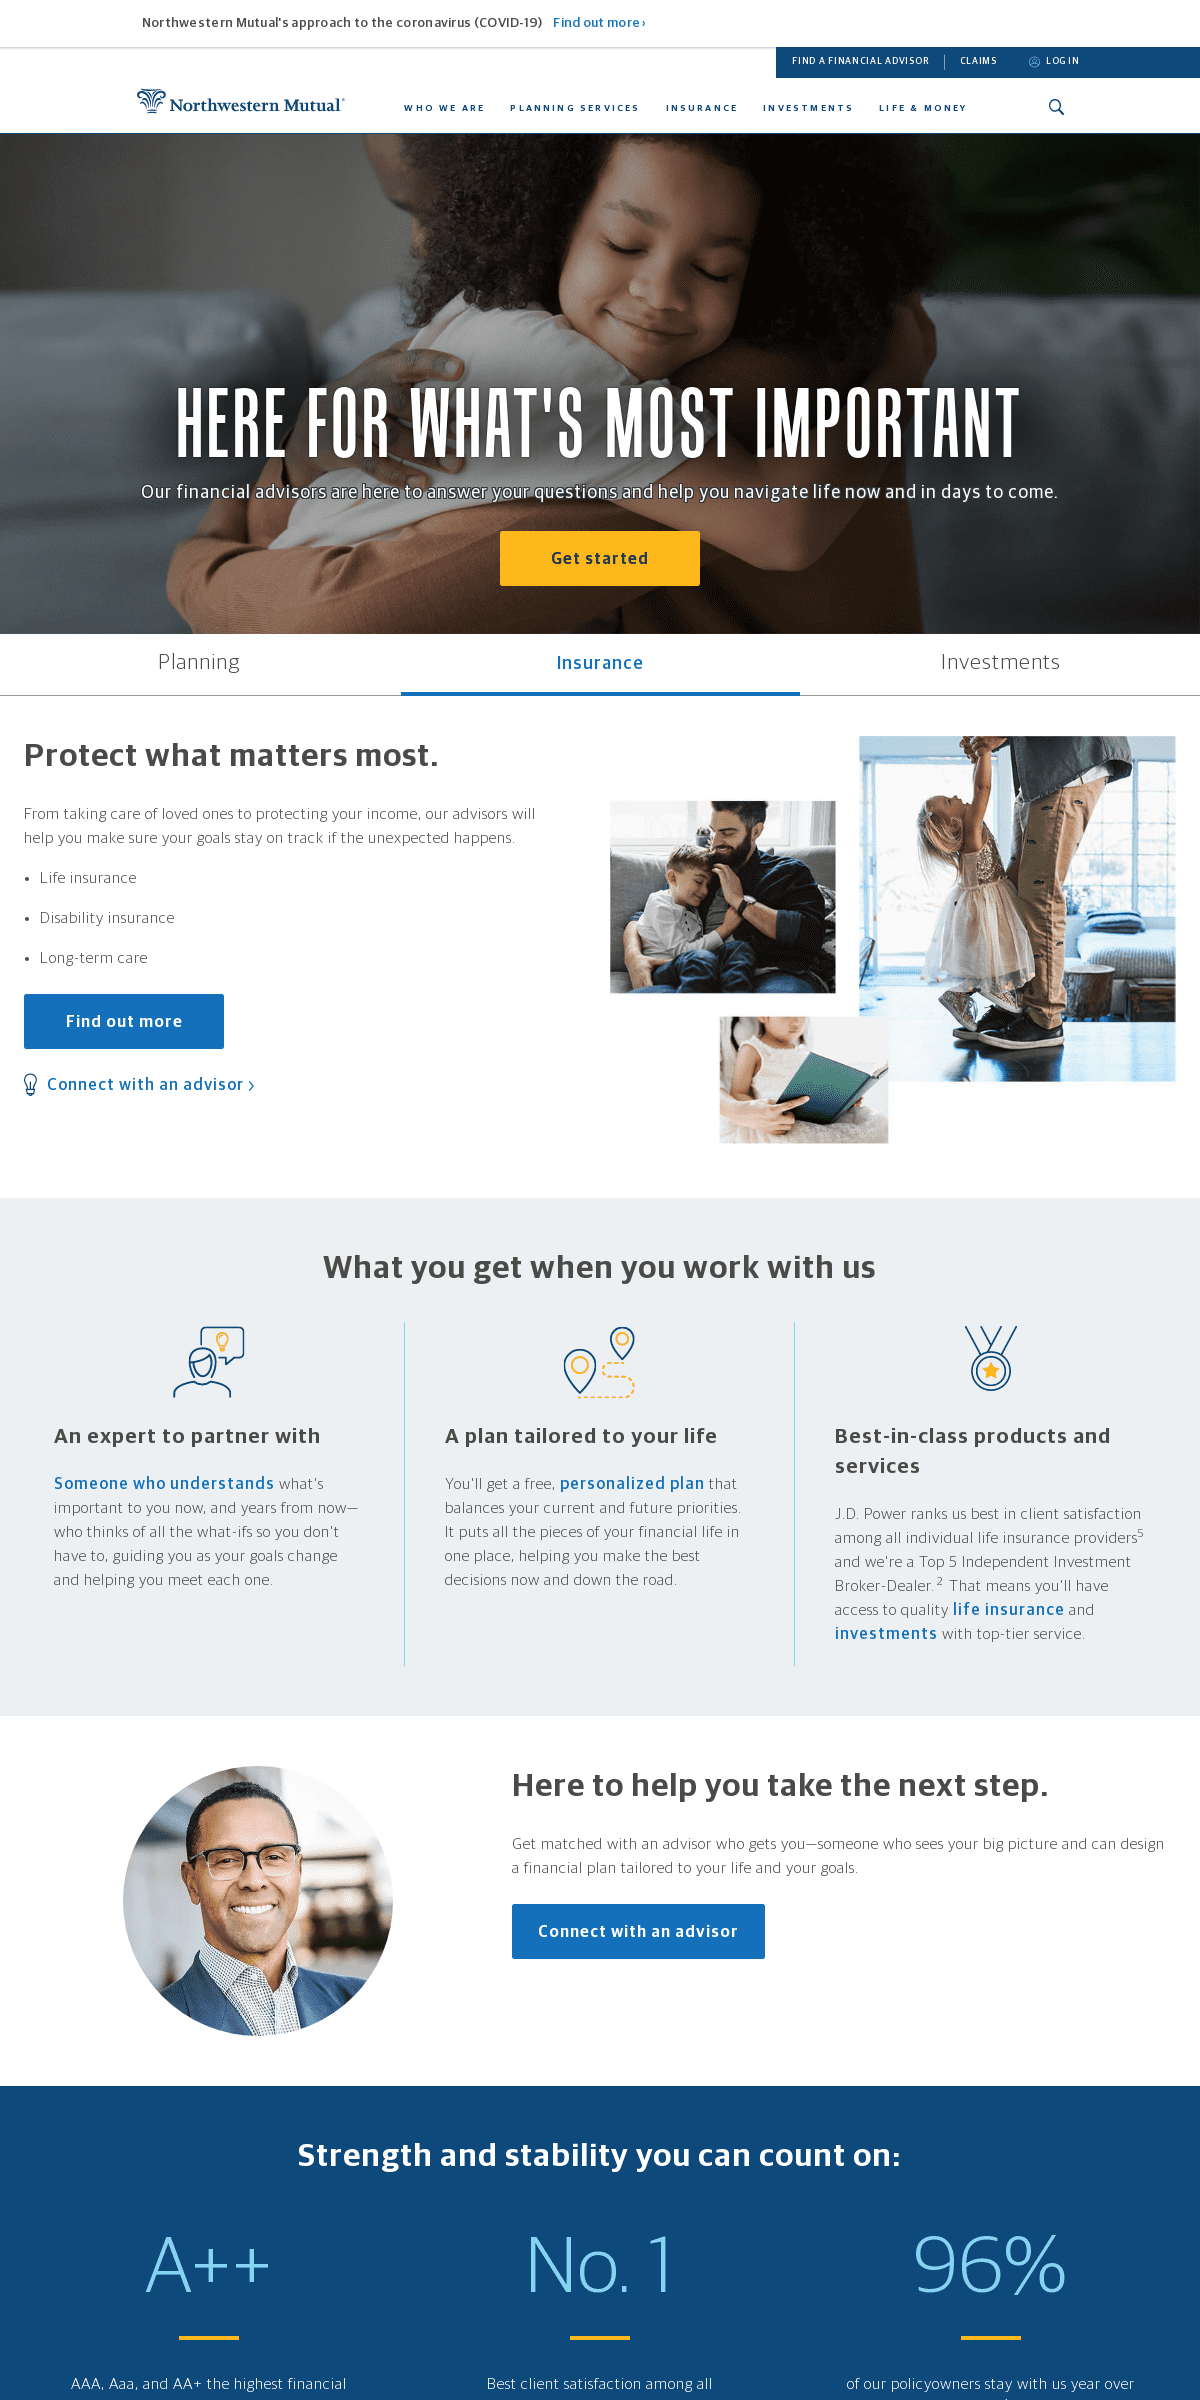 A complete backup of northwesternmutual.com